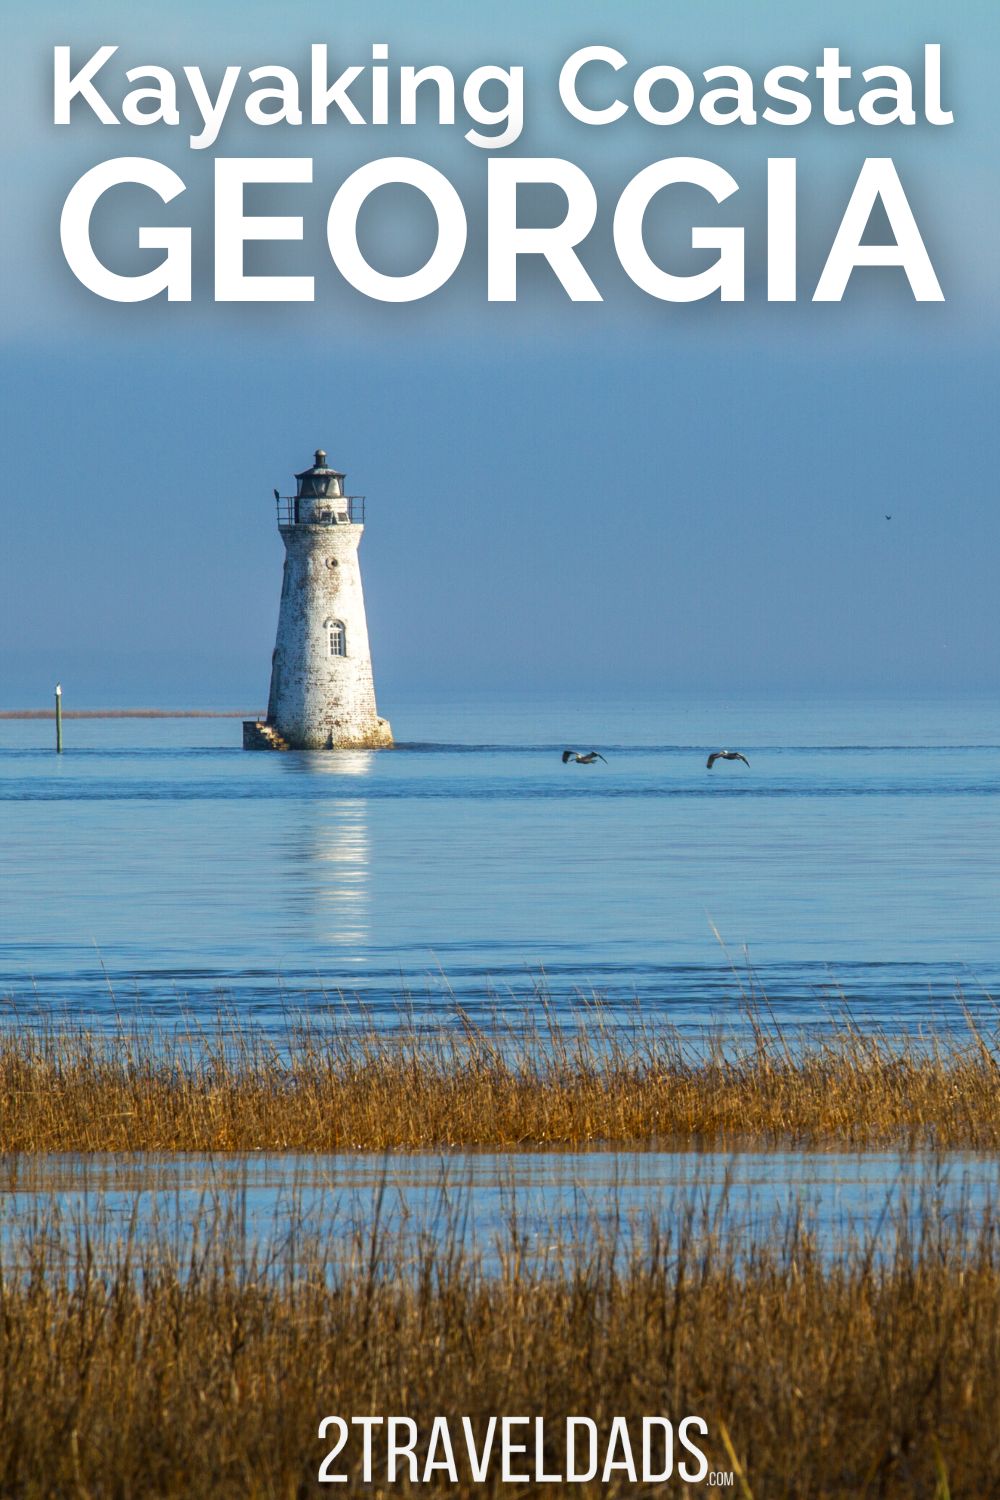 Kayaking Coastal Georgia includes wildlife refuges, historic forts, tidal lands and more. Check out these great spots to kayak on the Georgia coast.